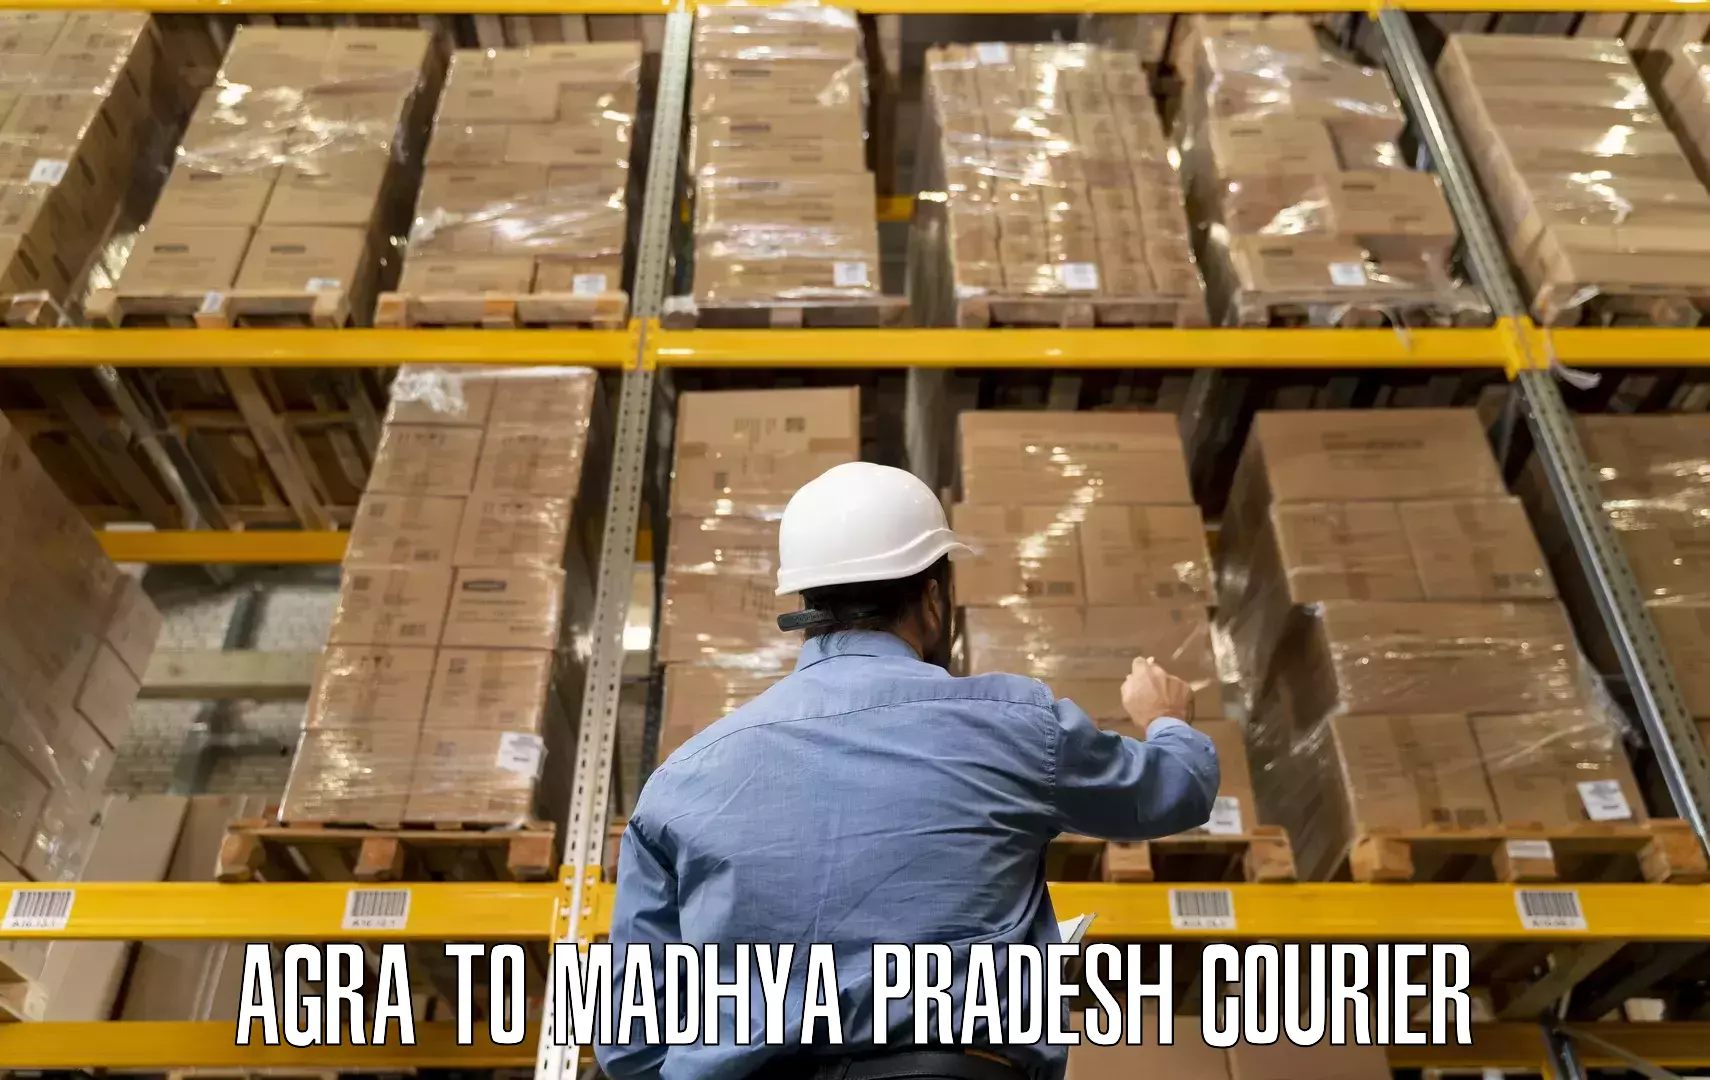 Home moving specialists Agra to Madhya Pradesh